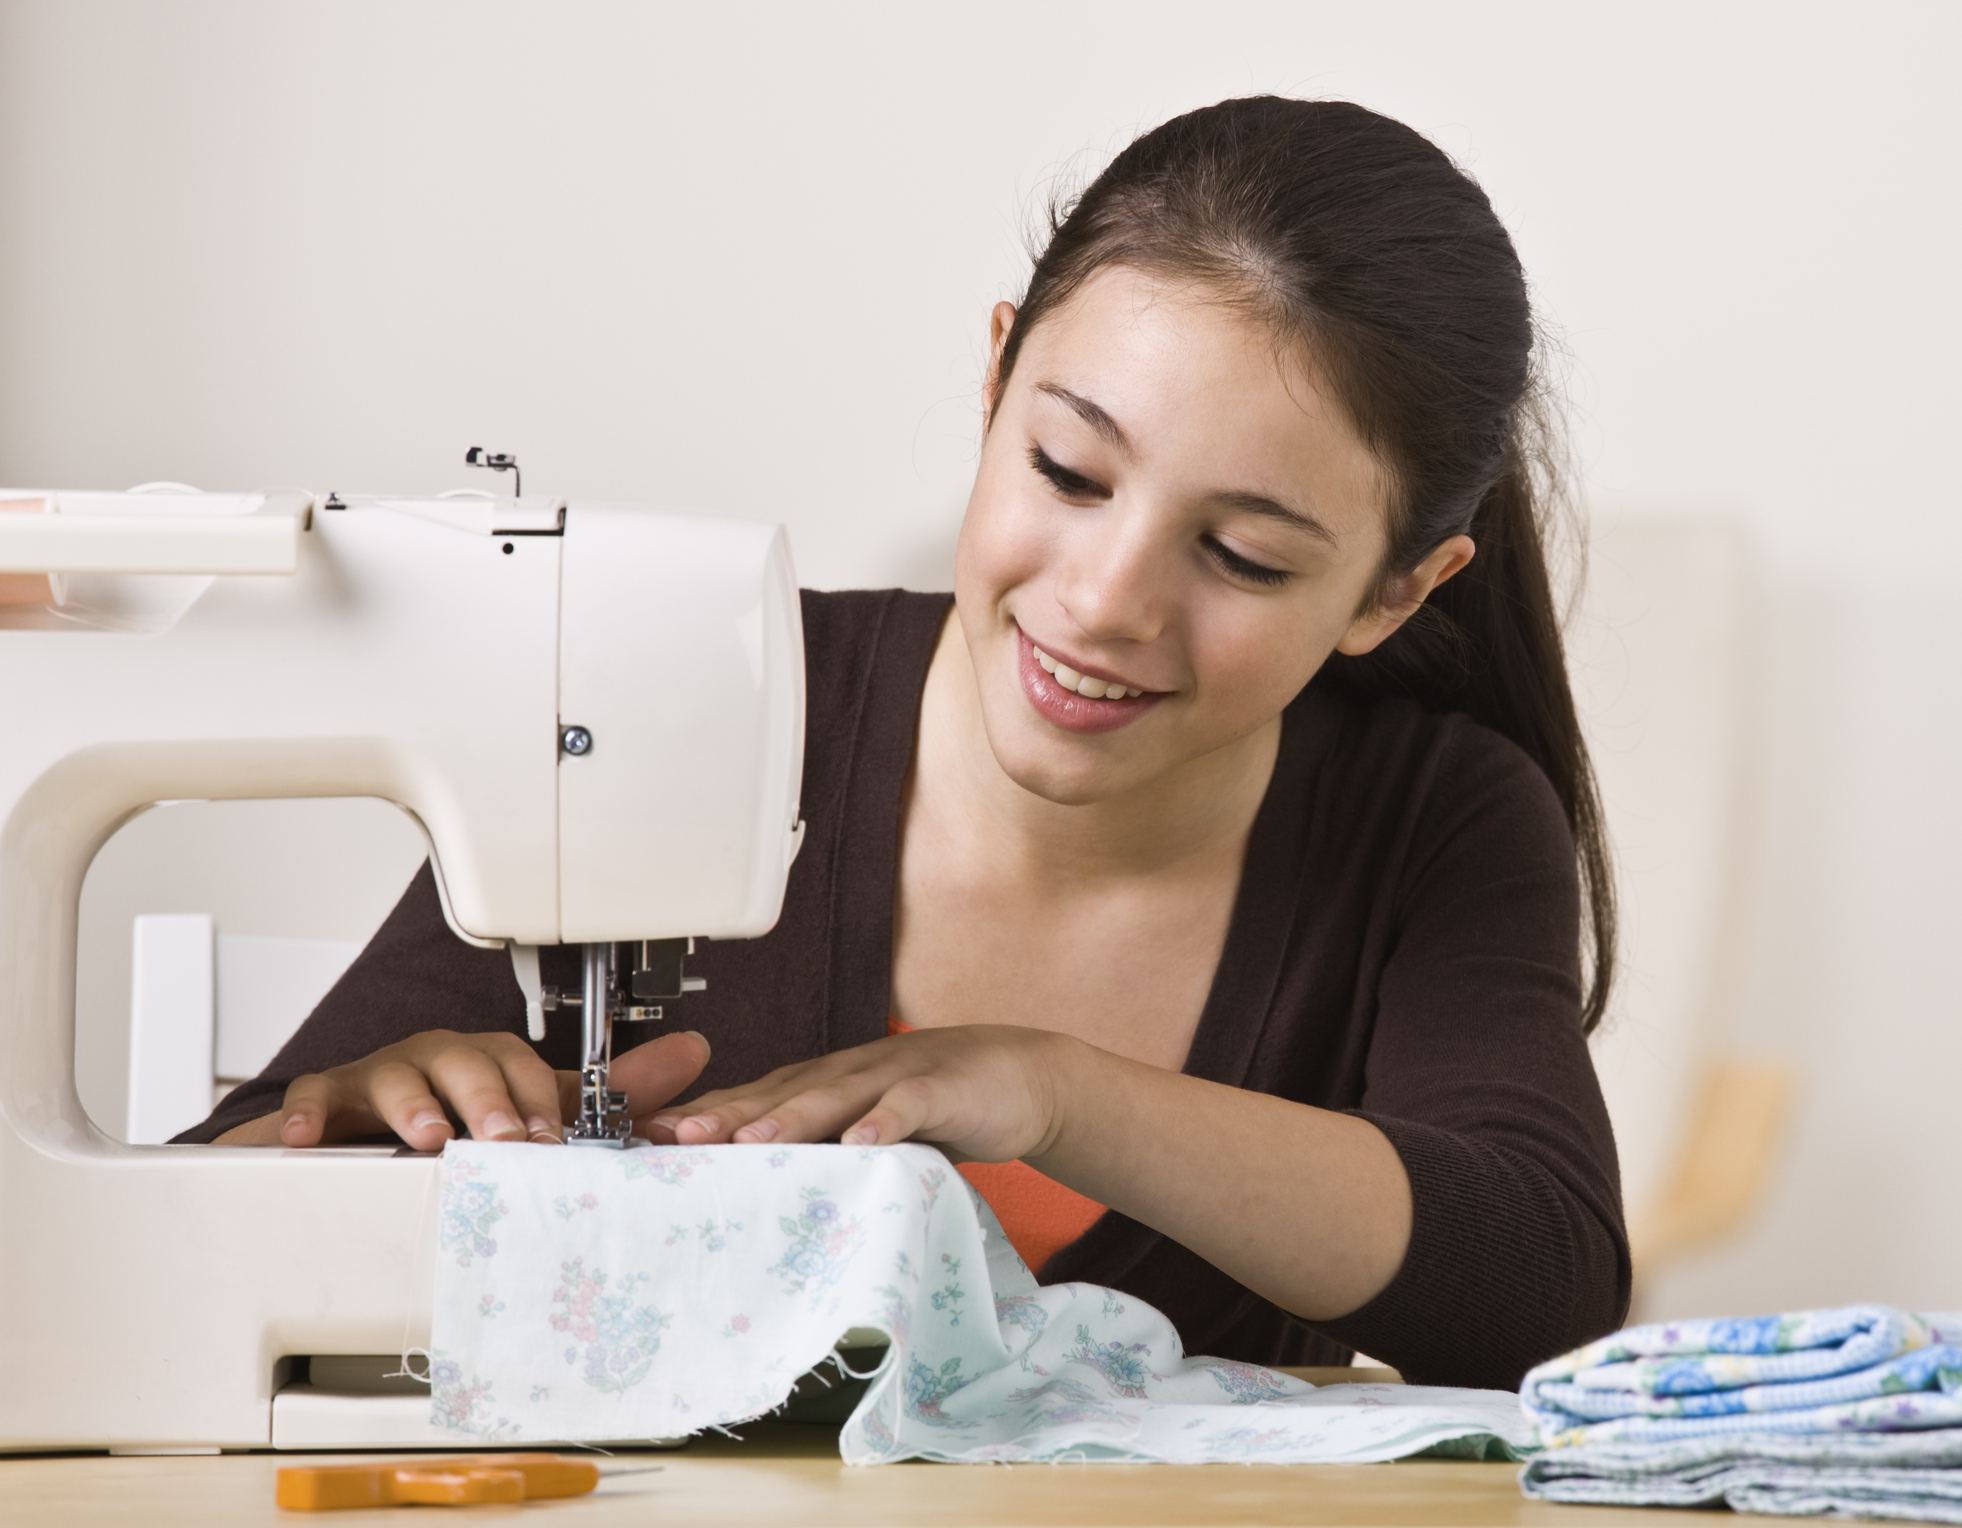 How to Begin A Home Sewing Business